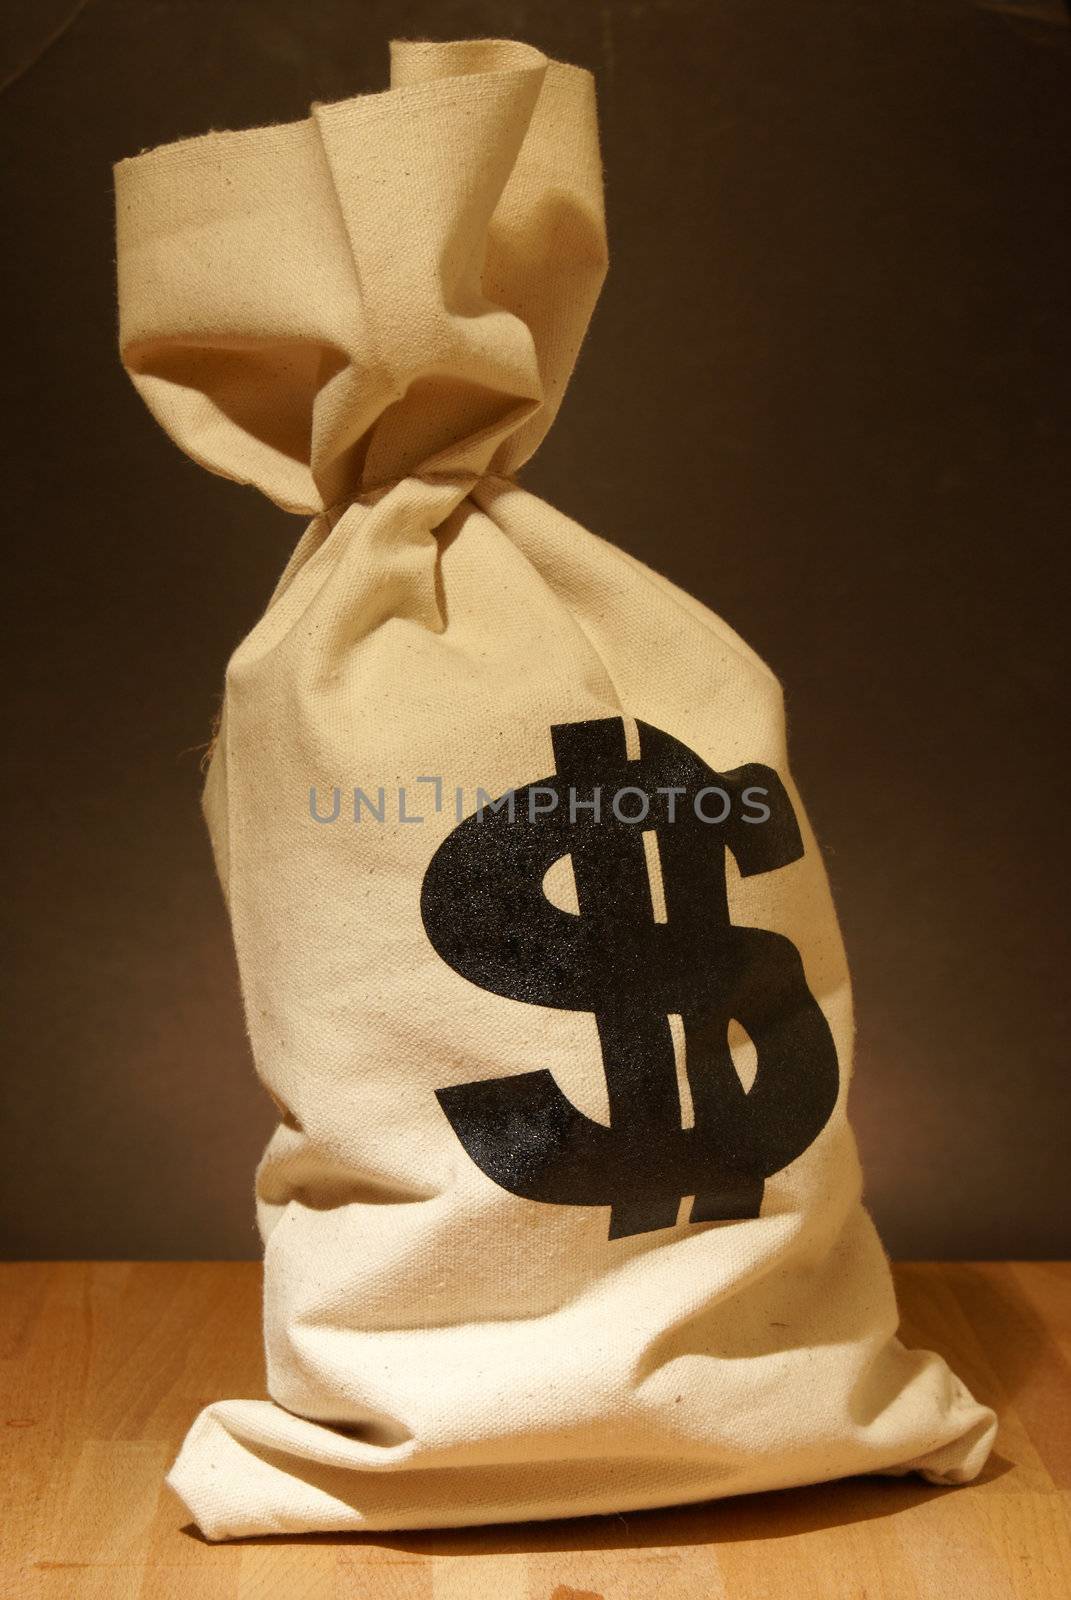 A bag of money with the dollar symbol stamped on it.